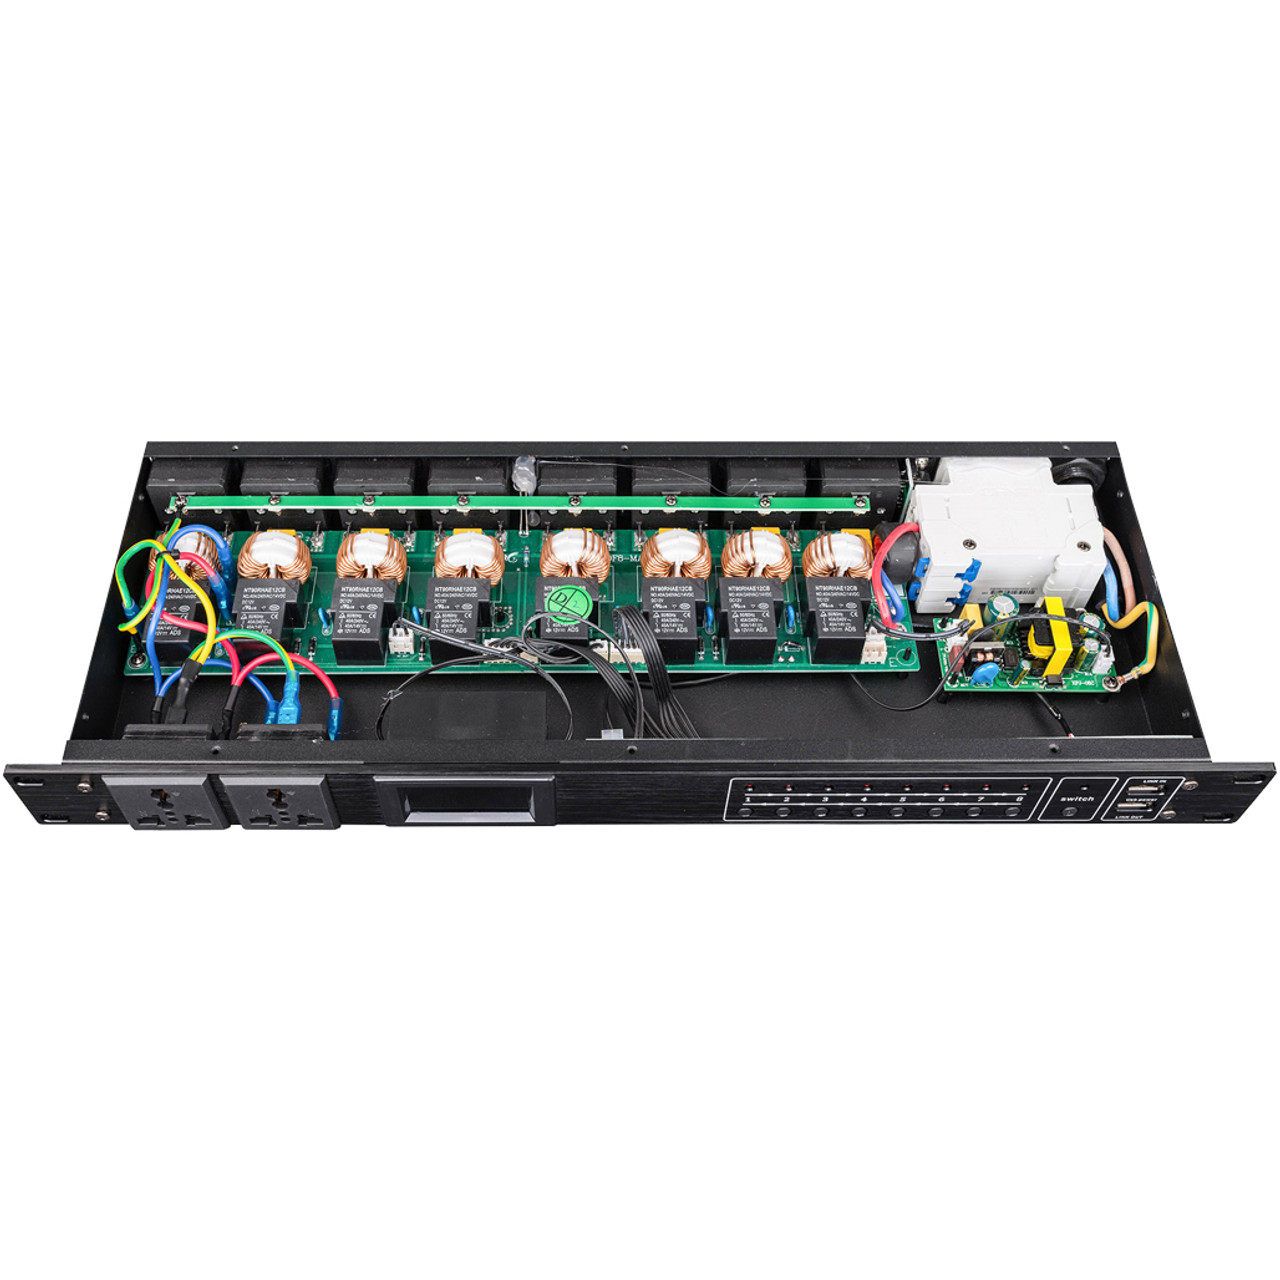 8 + 2 Channel Power Sequencer With Central Control, Filtering function (A17)